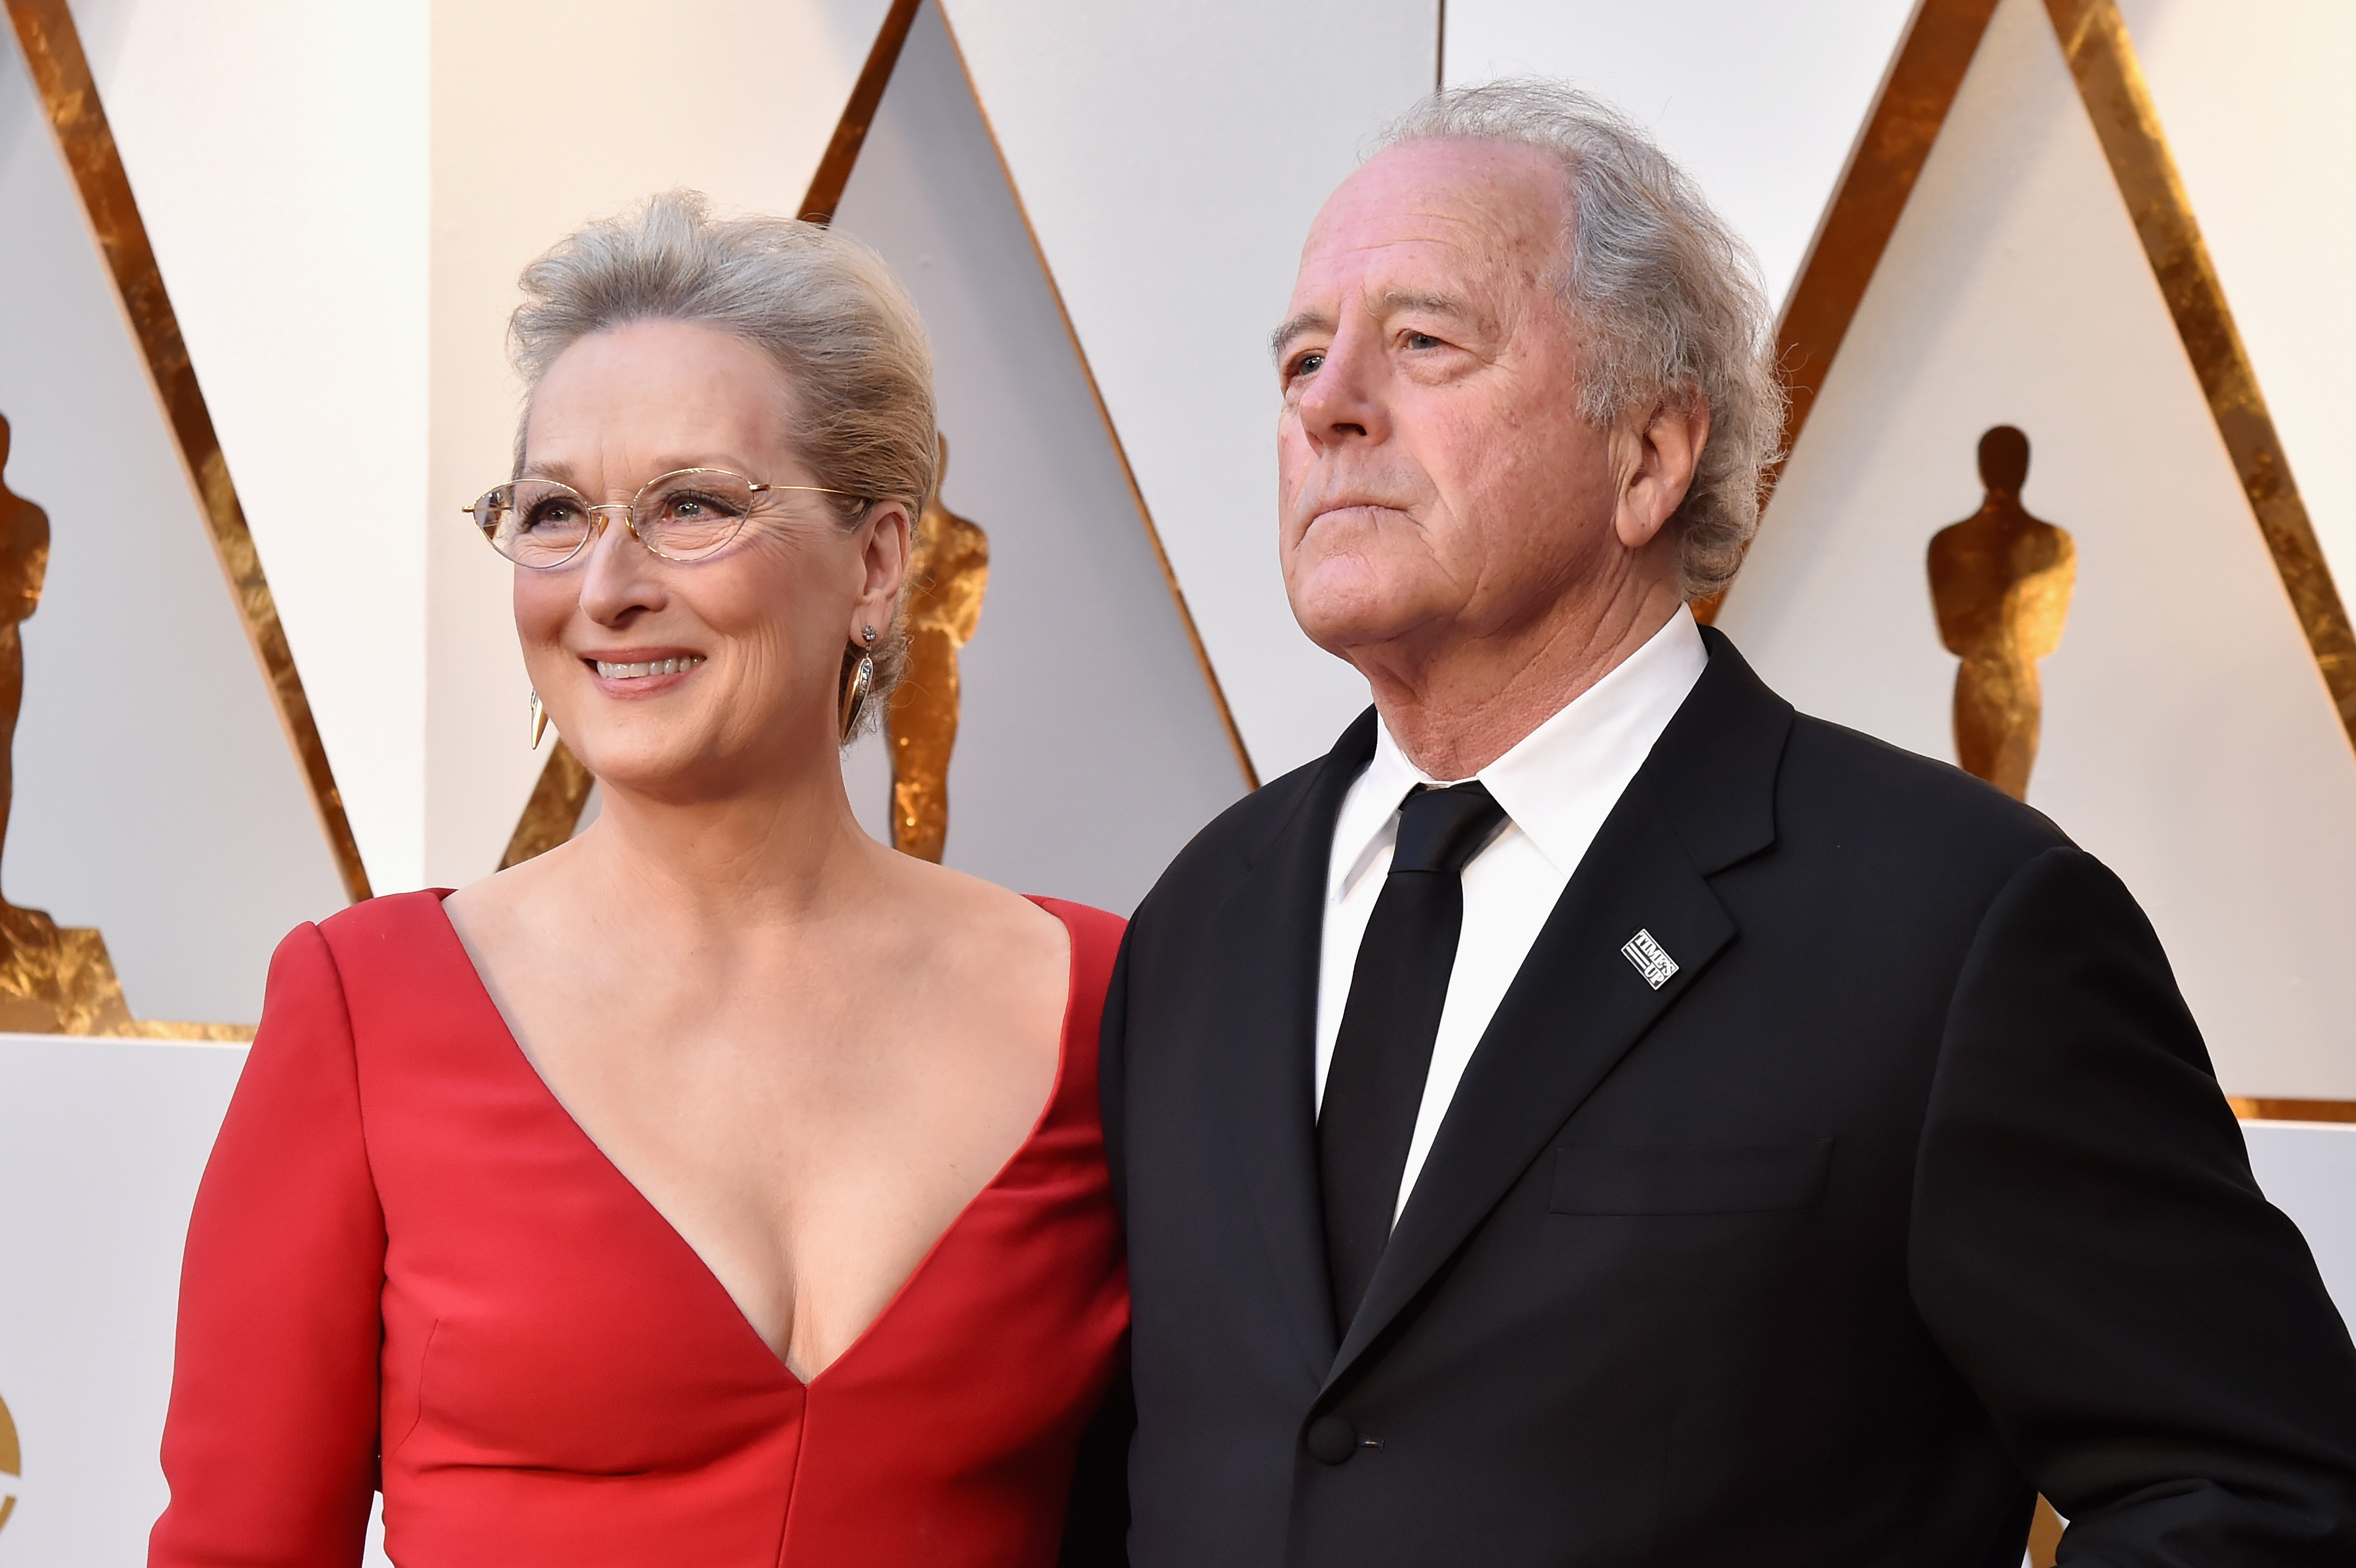 Meryl Streep and Don Gummer, 2018 | Source: Getty Images